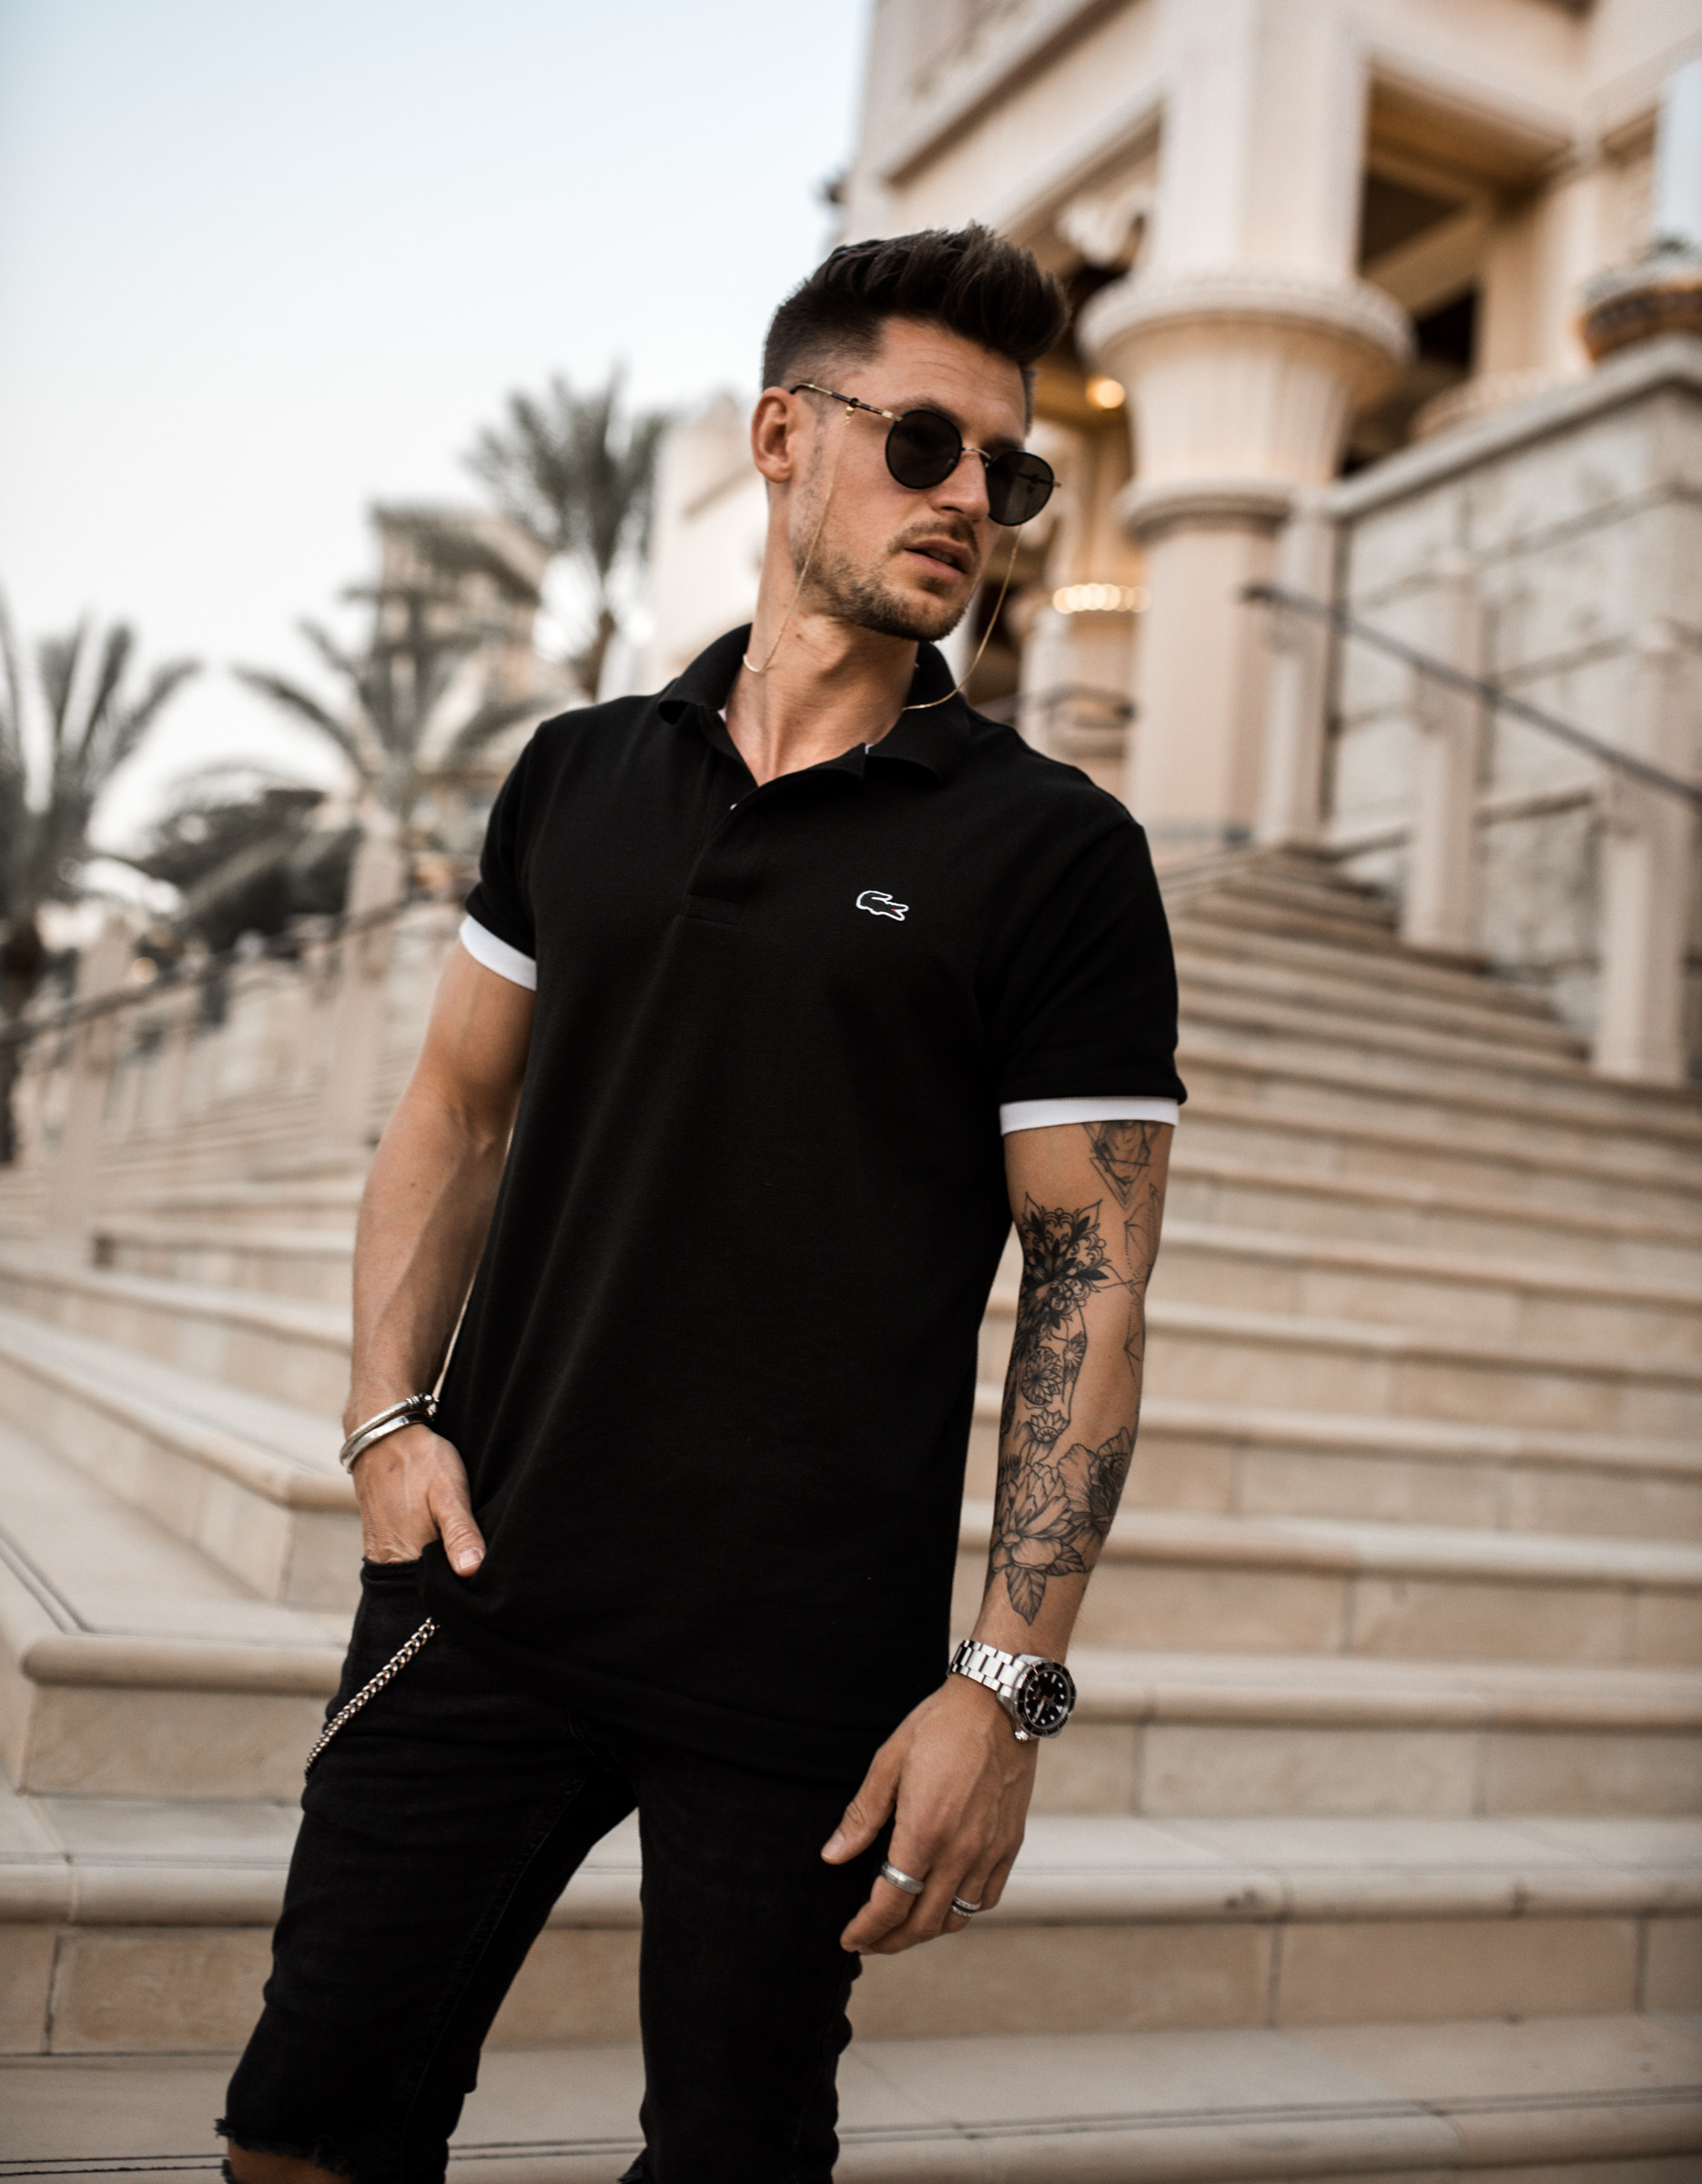 Tommeezjerry-Lifestyleblog-Fashionblog-Maennermodeblog-Maennerblog-Modeblog-Dubai-Lacoste-Polo-Shirt-Outfit-Sommer-Look-Springtime